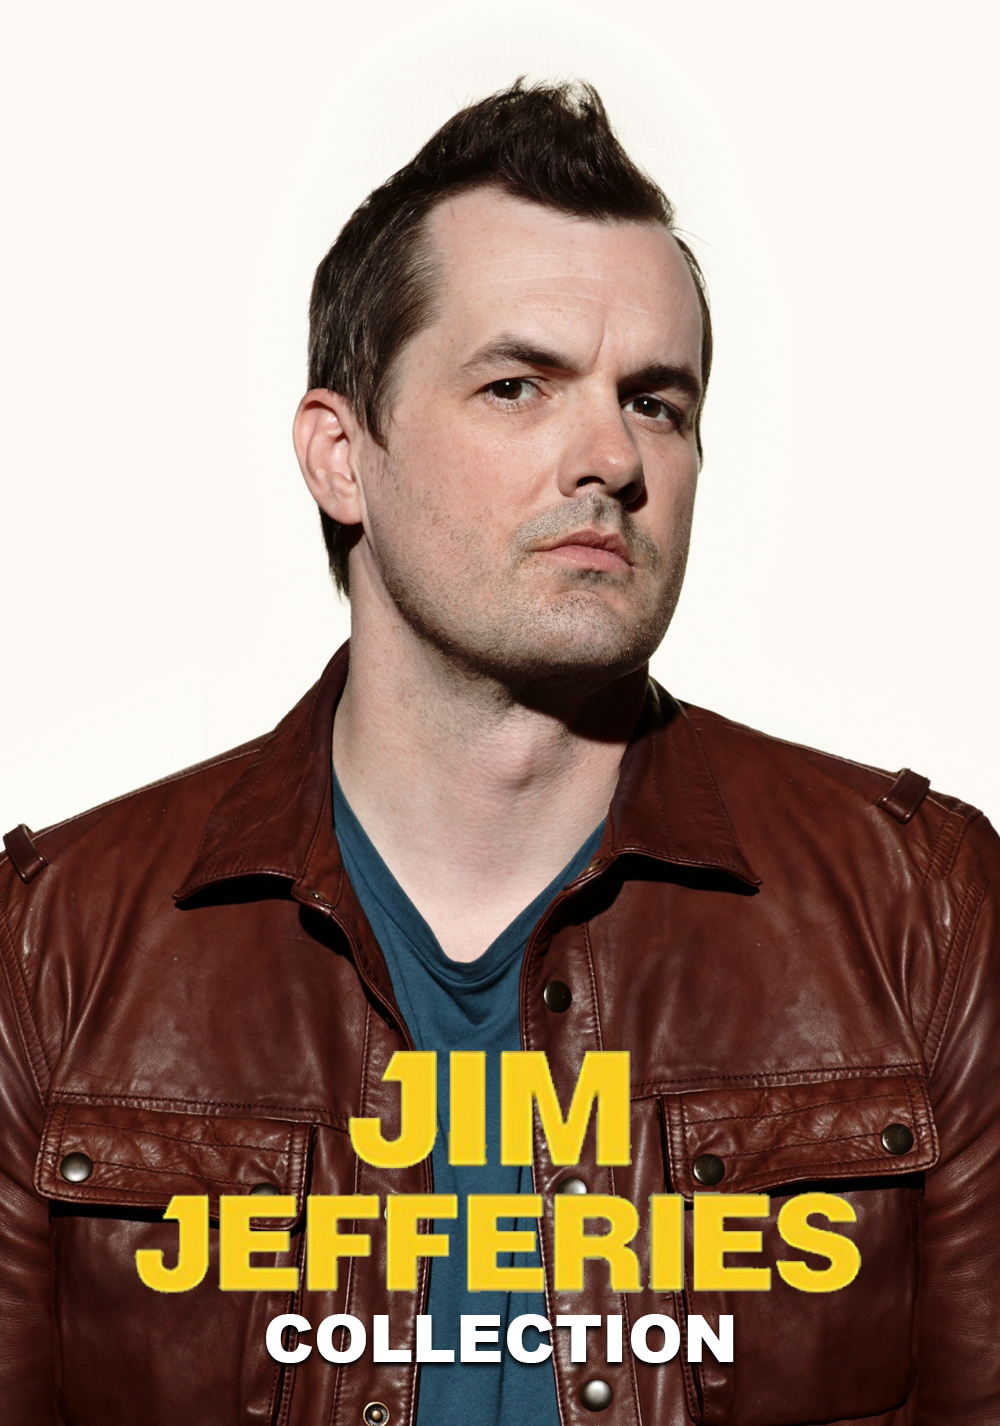 Image Jim Jefferies in Stand Up Comedy album.